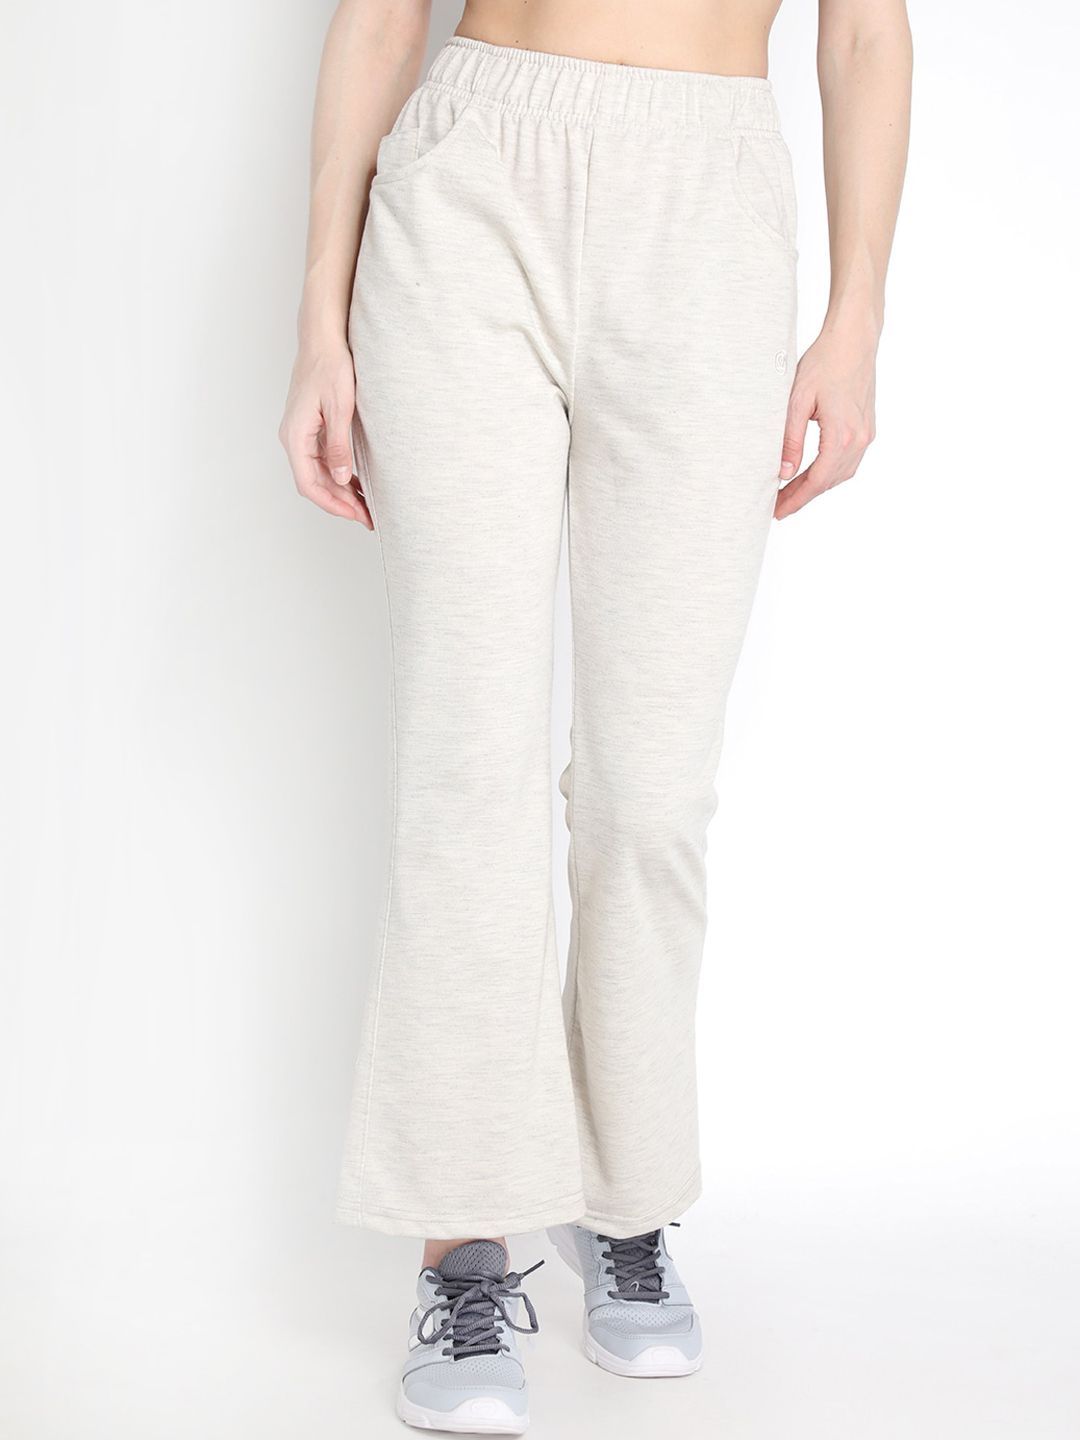 Chkokko Women Grey Solid Bootcut Track Pants Price in India